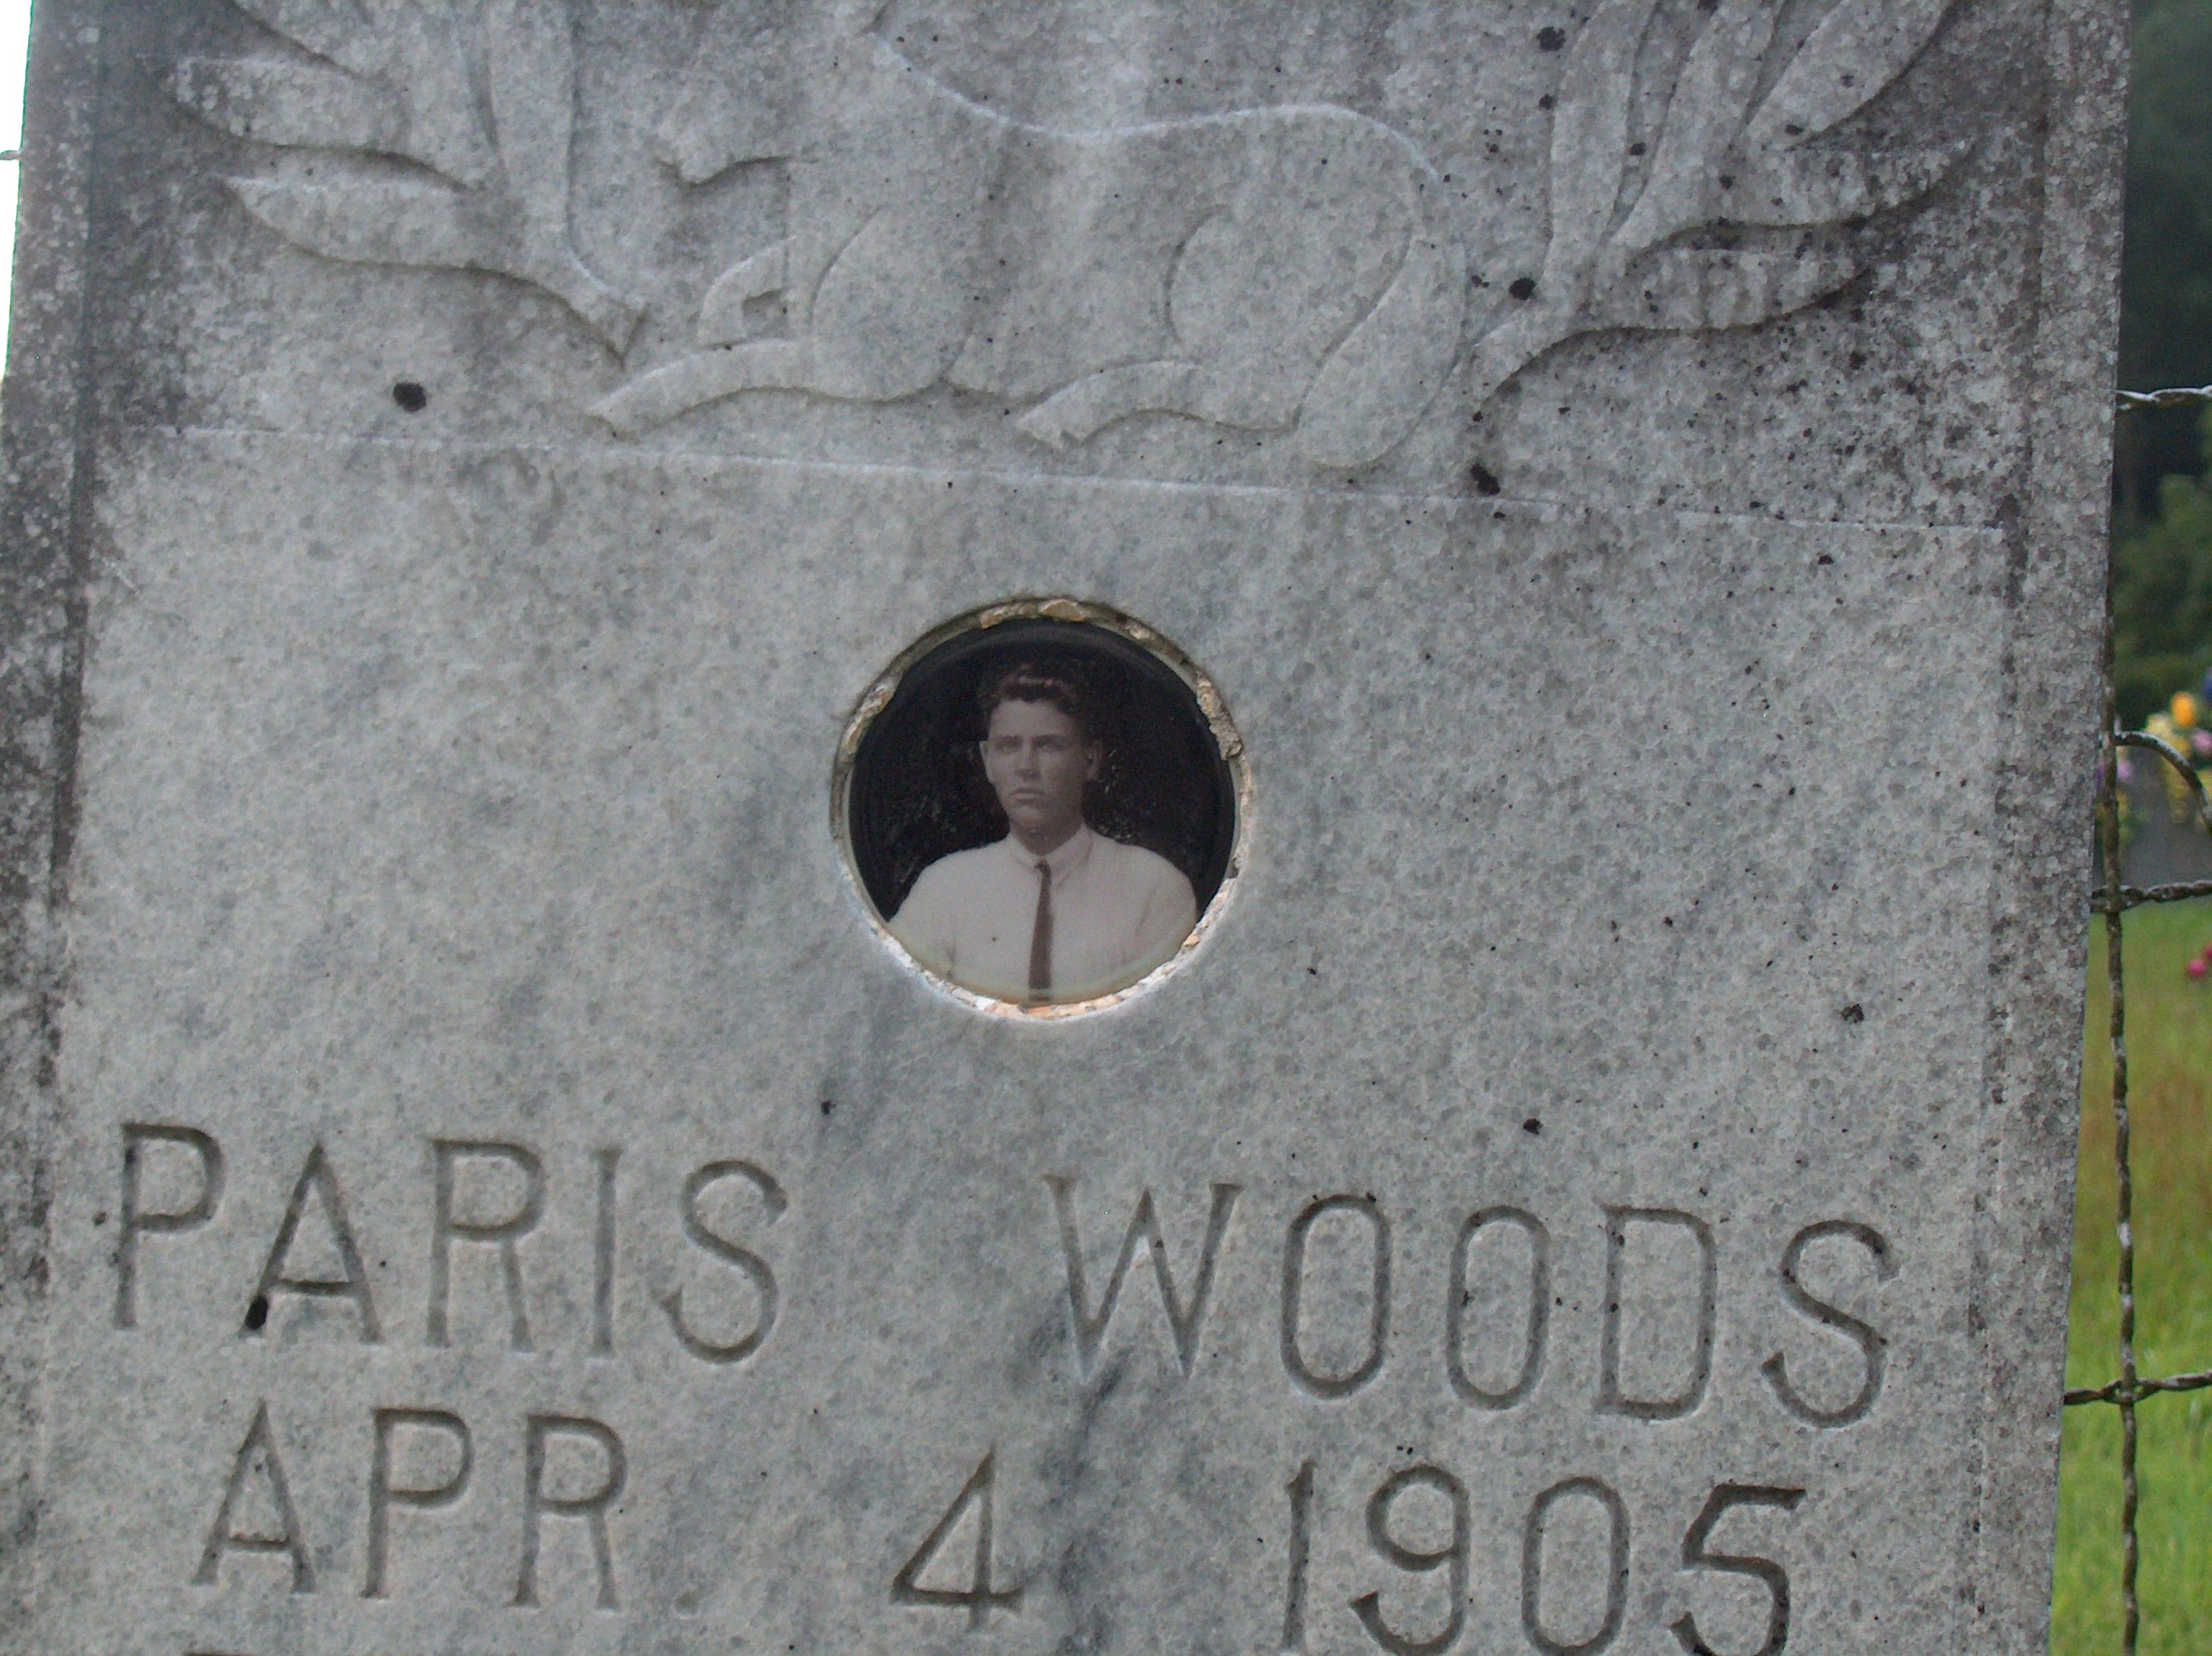 Grave of Paris Woods with an embedded photo